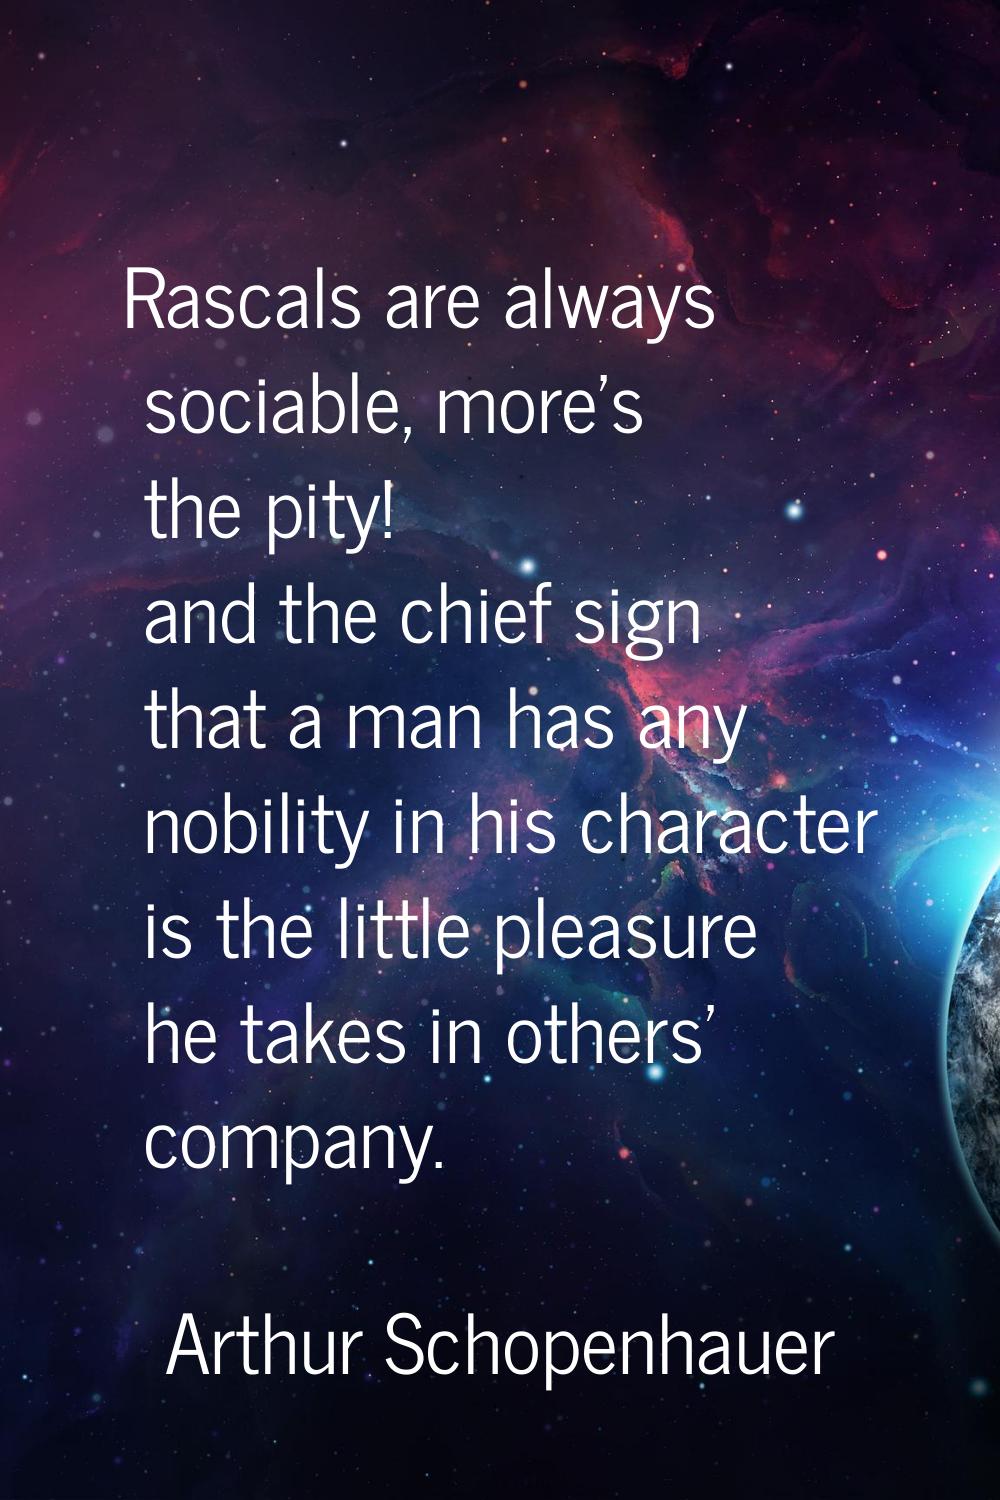 Rascals are always sociable, more's the pity! and the chief sign that a man has any nobility in his